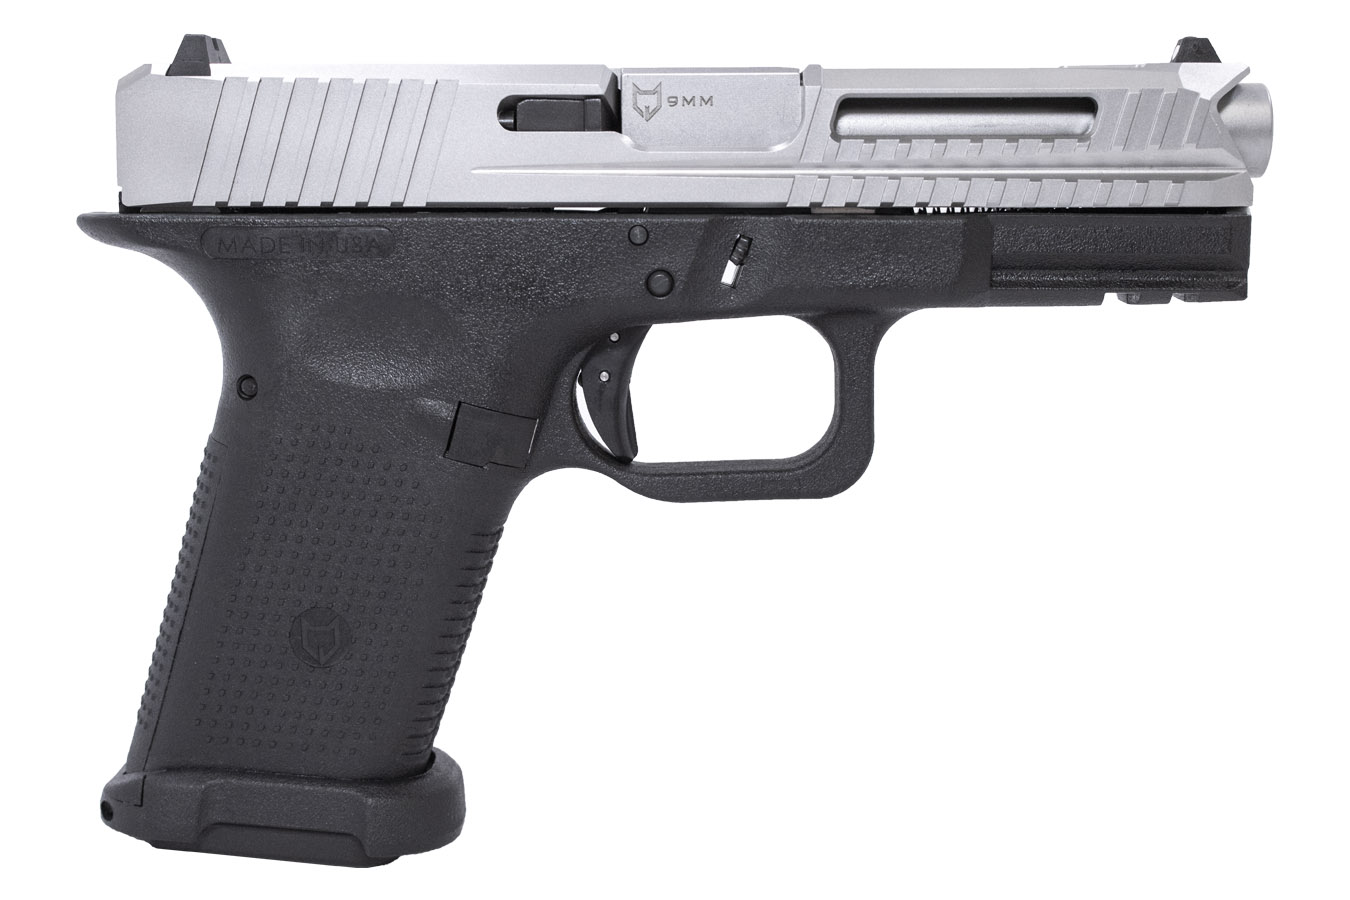 LONE WOLF LTD19 V2 9MM COMPACT PISTOL WITH BLACK FRAME AND SILVER SLIDE